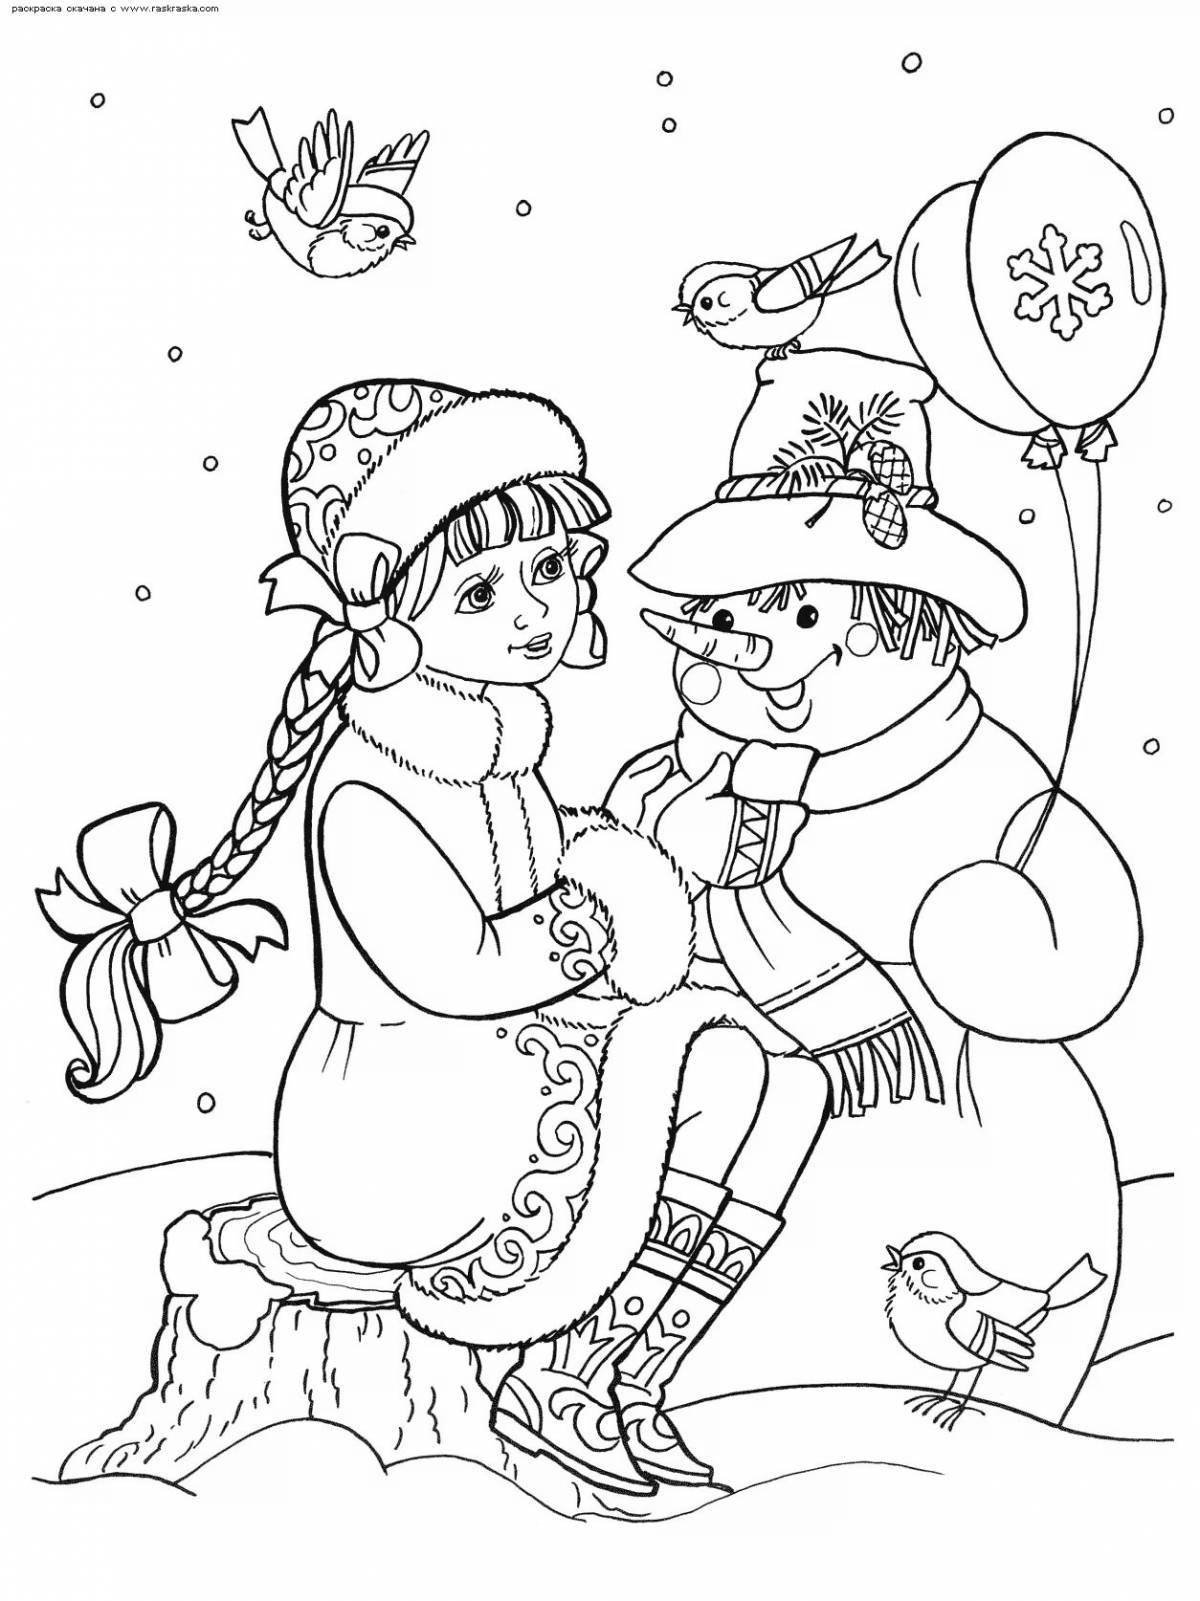 Glowing Christmas coloring book